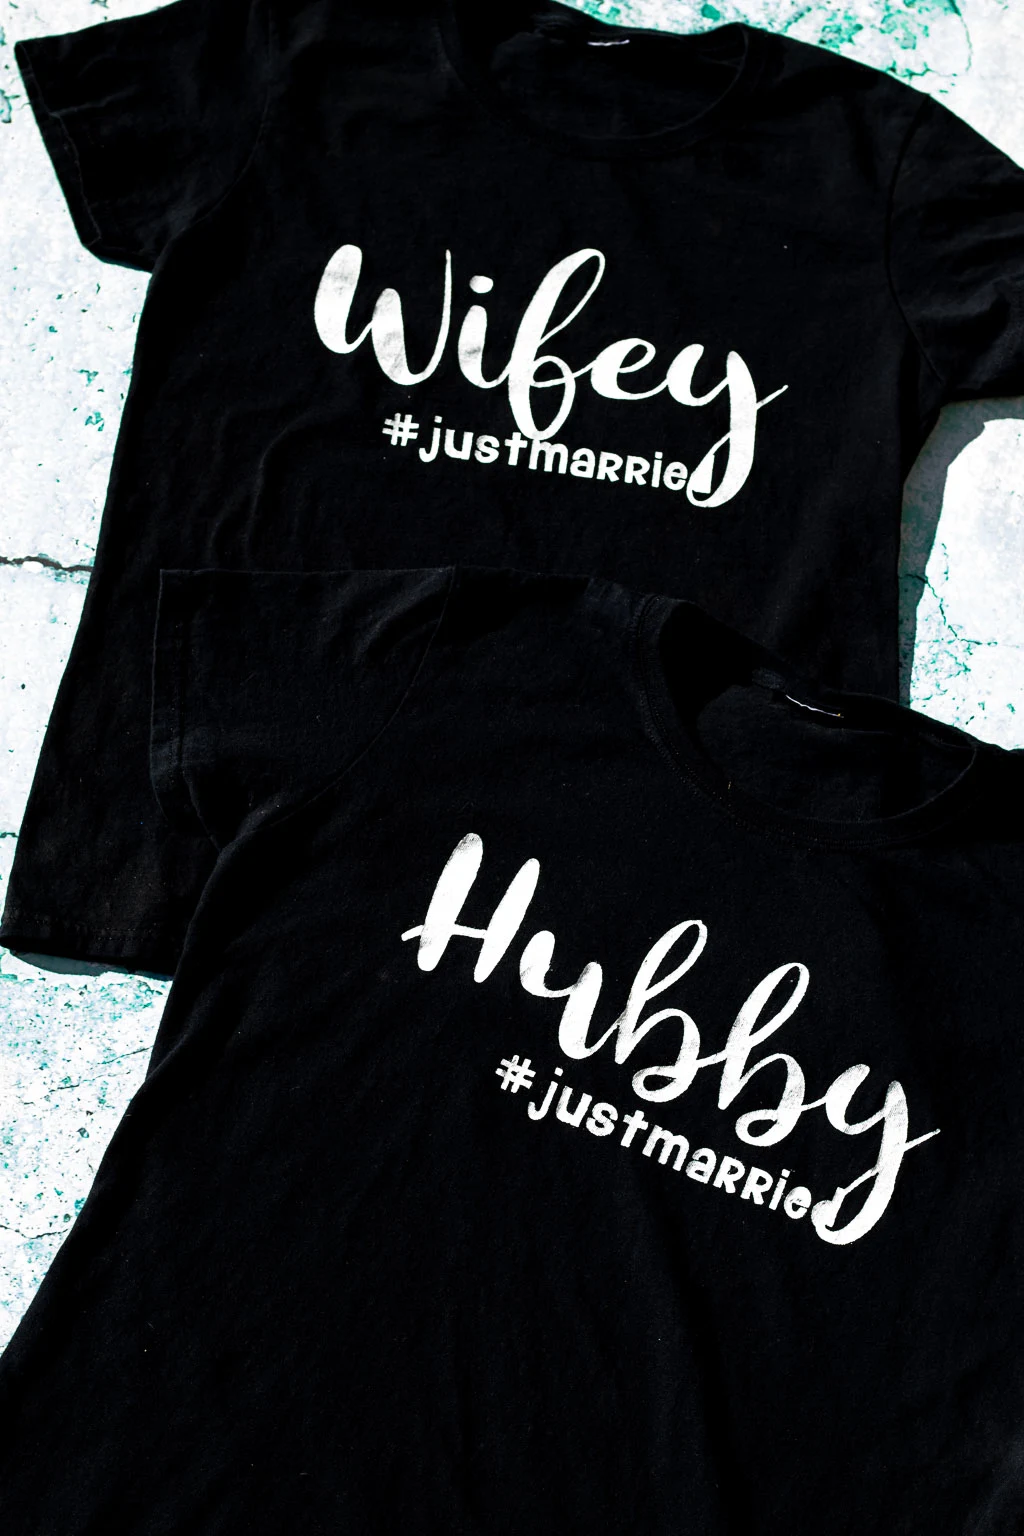 wifey and hubby shirts